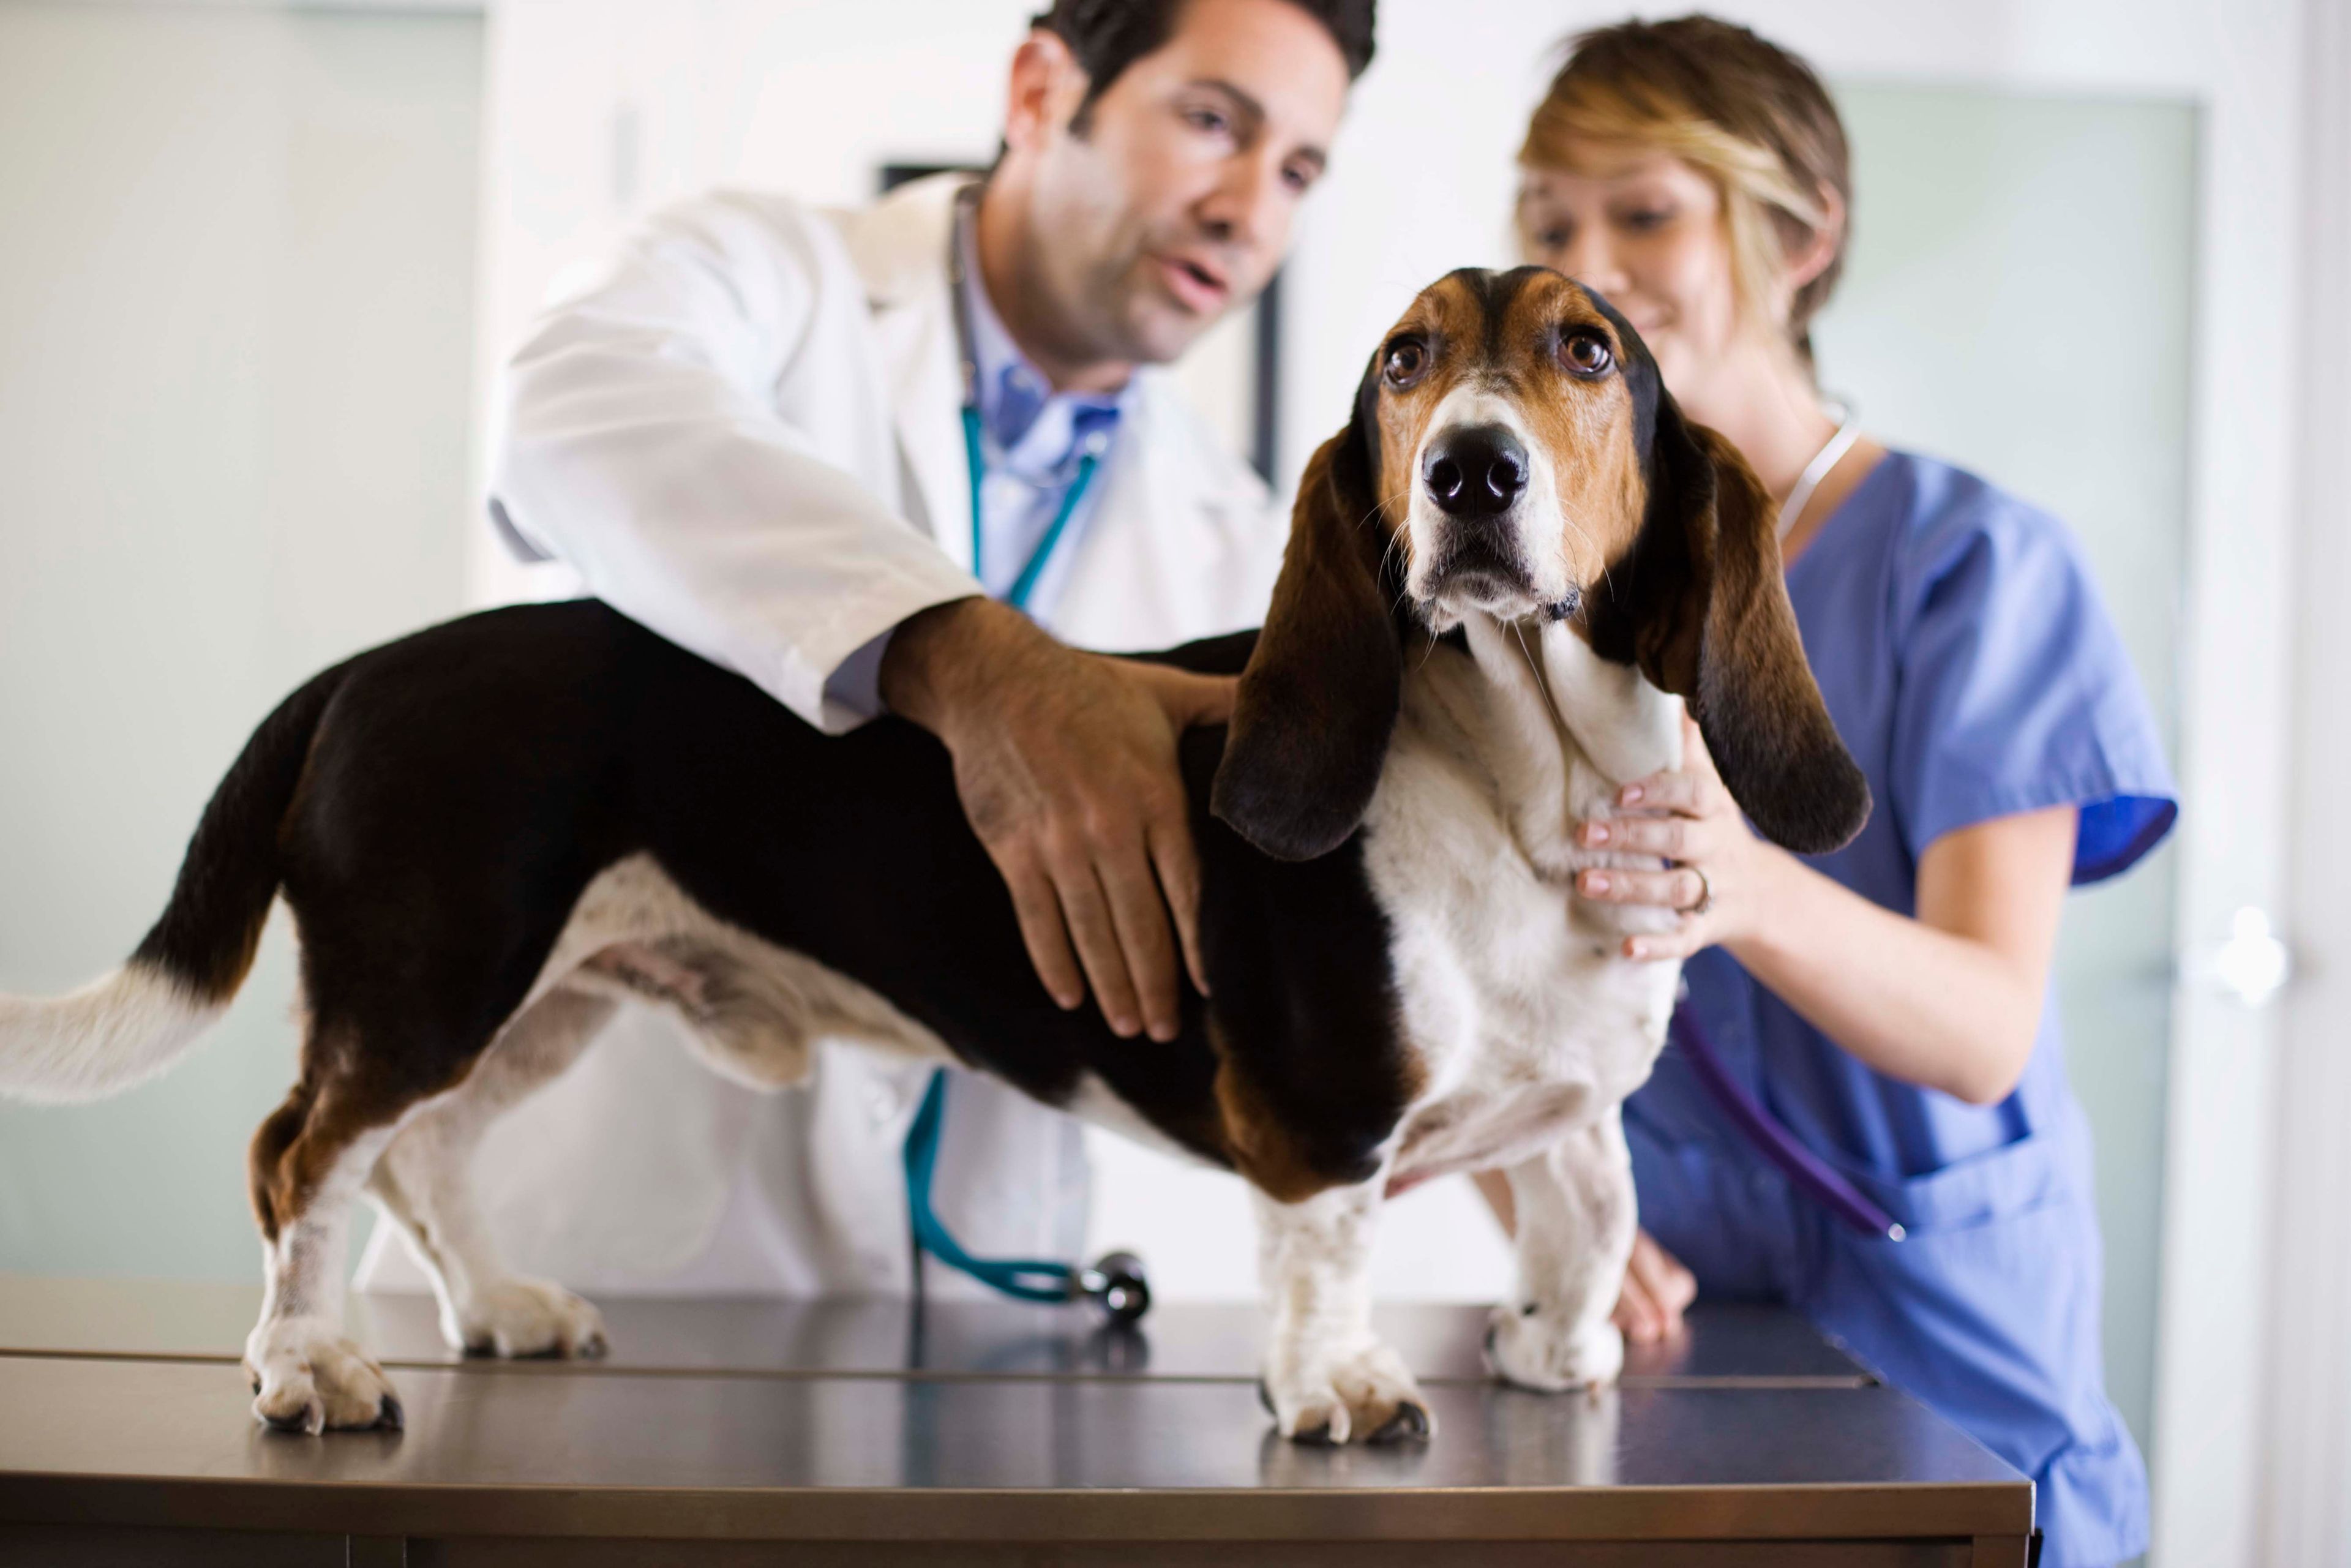 A pair of vets comfort and examine a dog